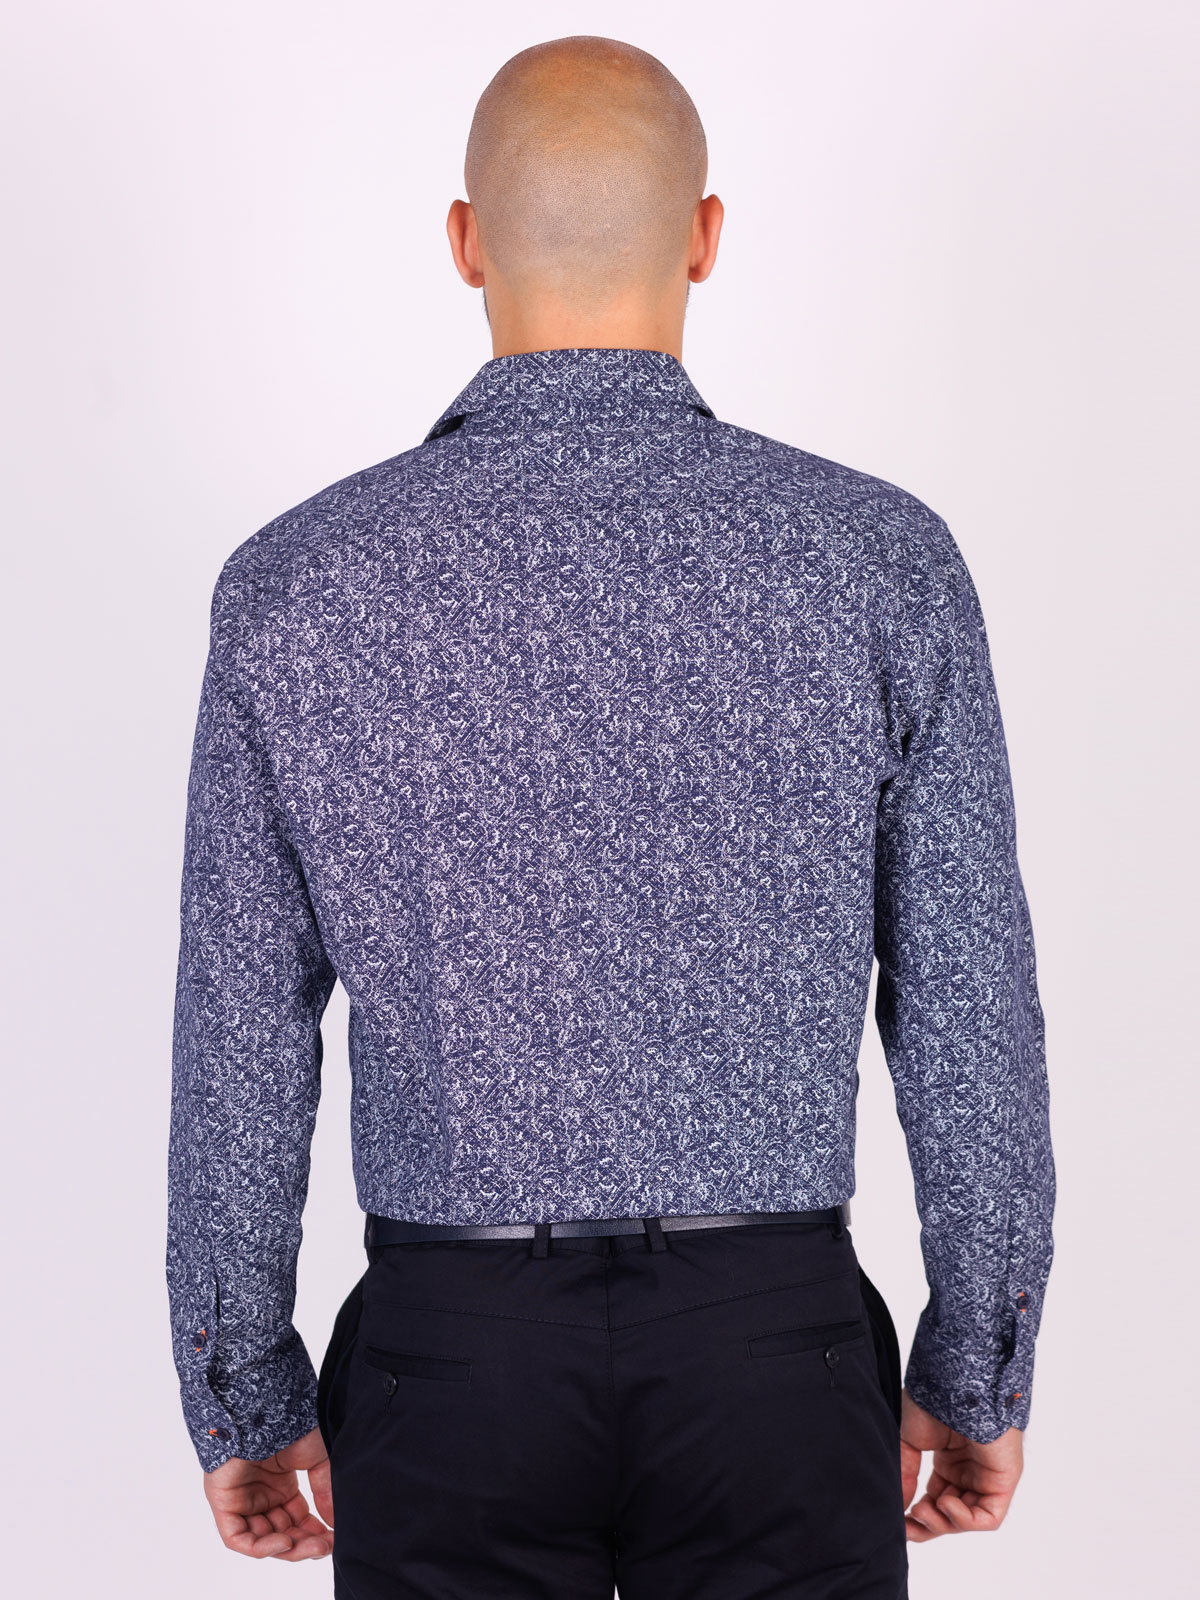 Shirt in dark blue with figures - 21550 € 44.43 img2